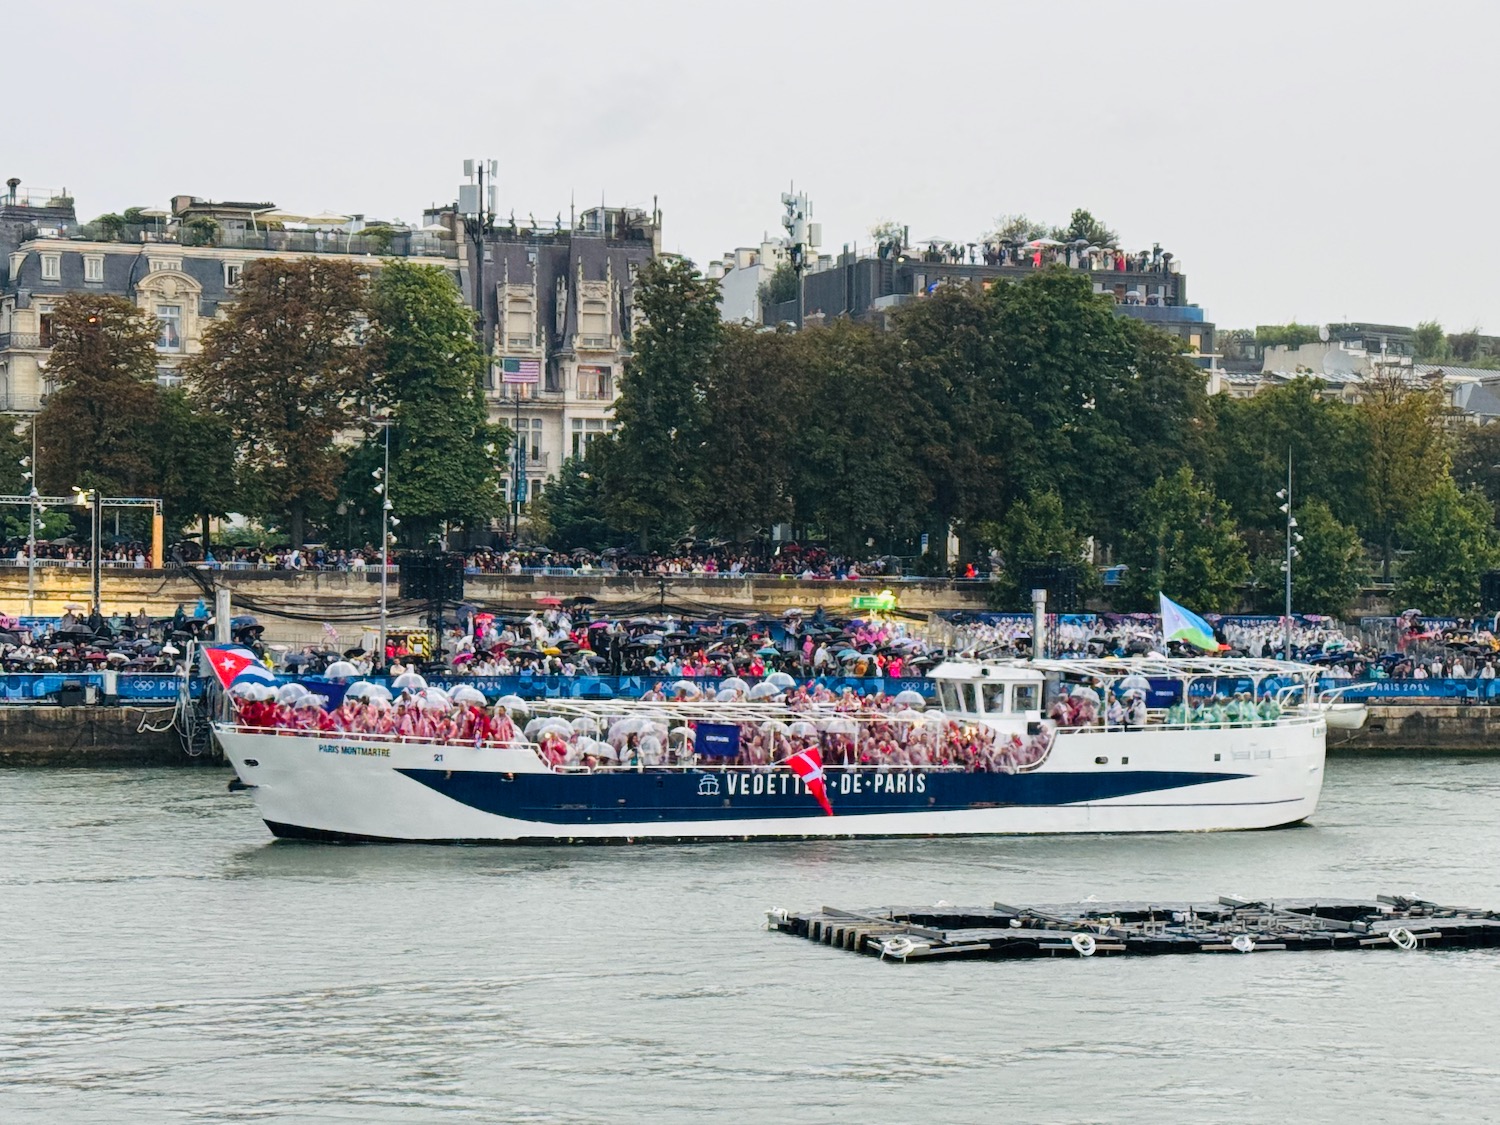 a large boat with people on it